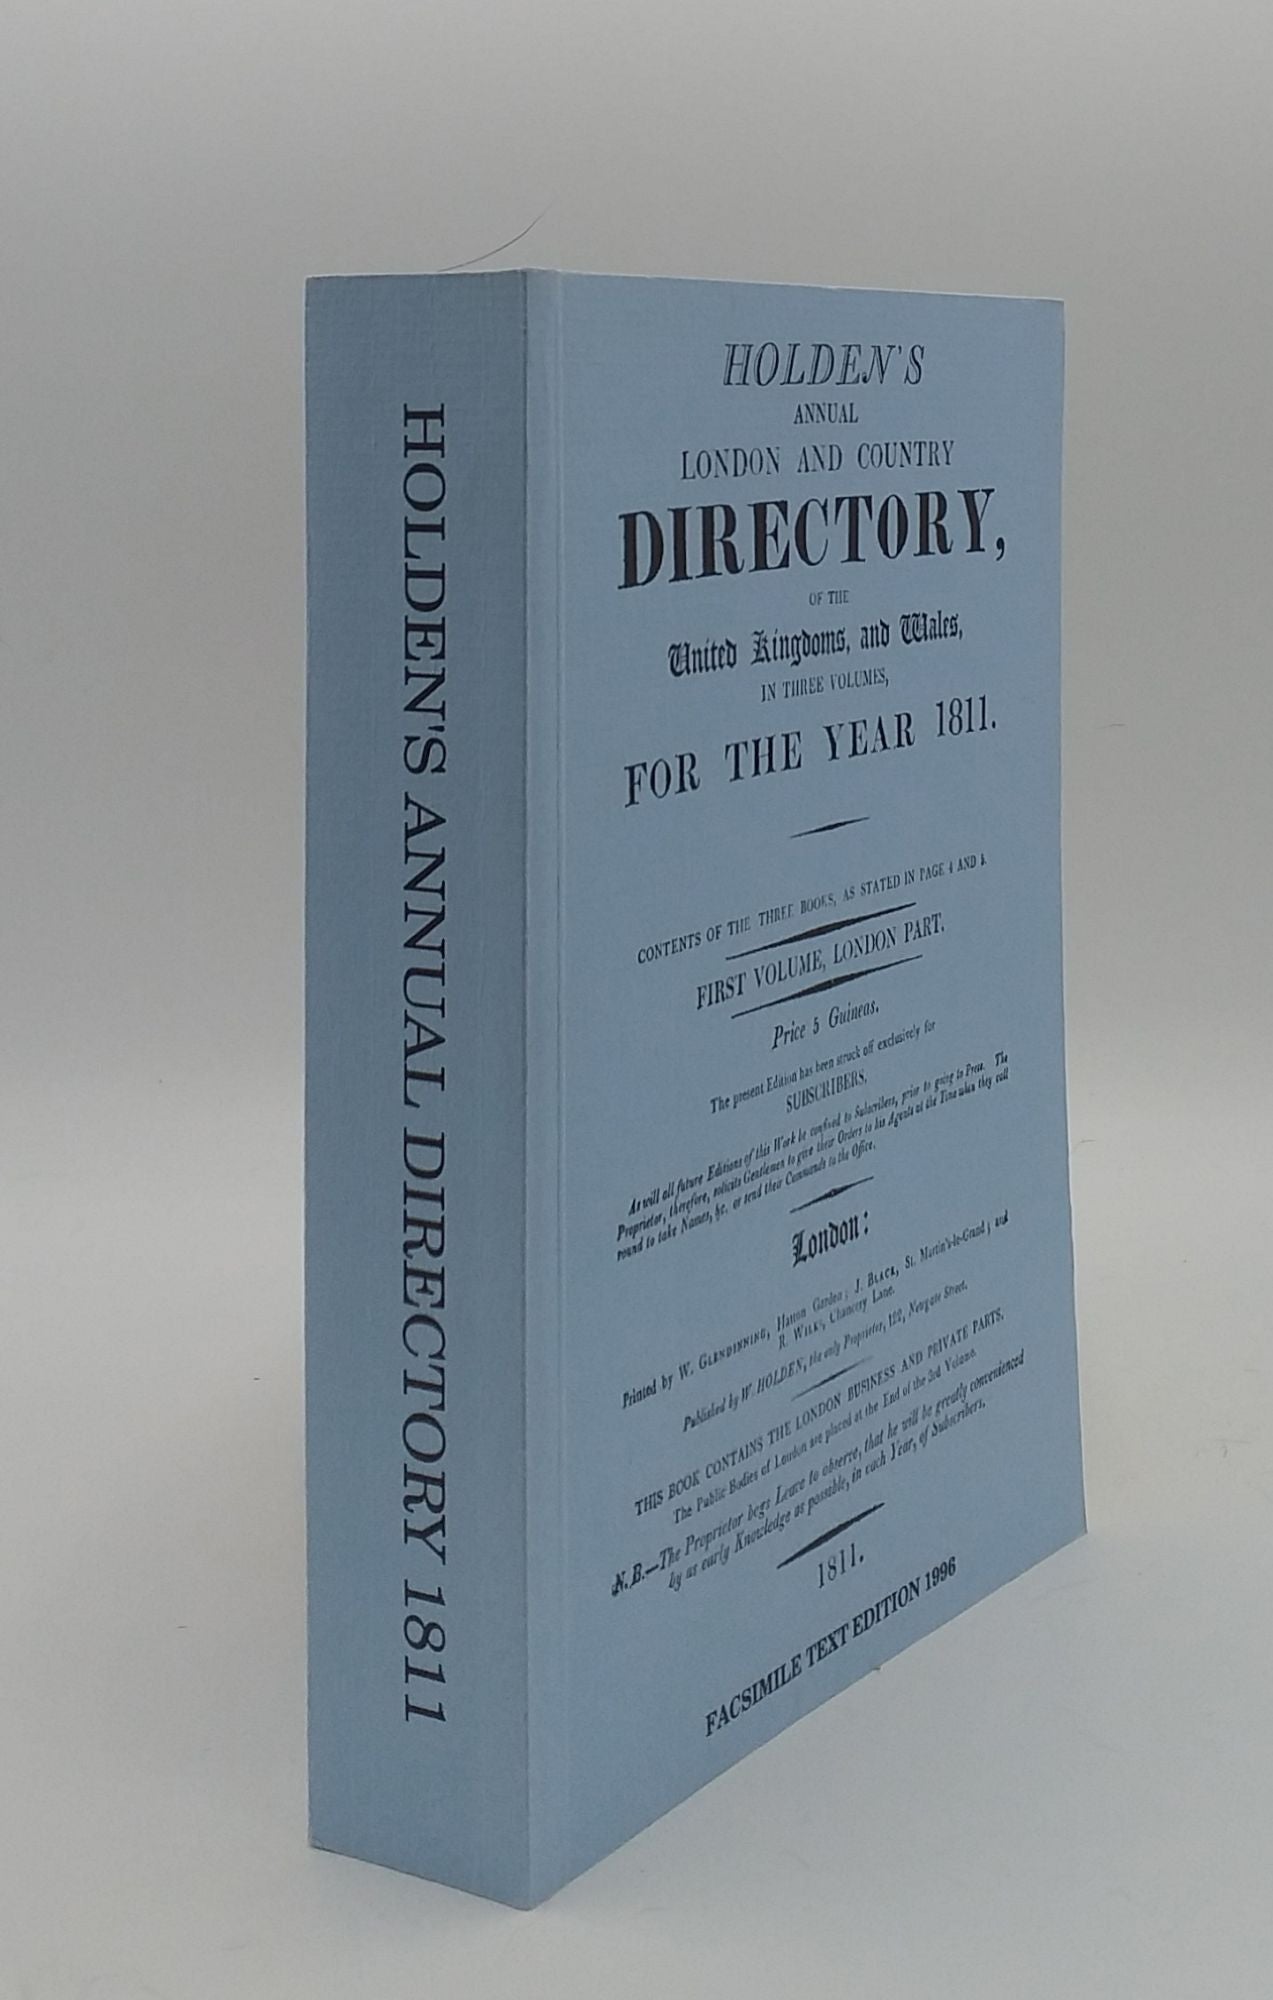 W. Holden - Holden's Annual London and Country Directory for the Year 1811 Volume 1